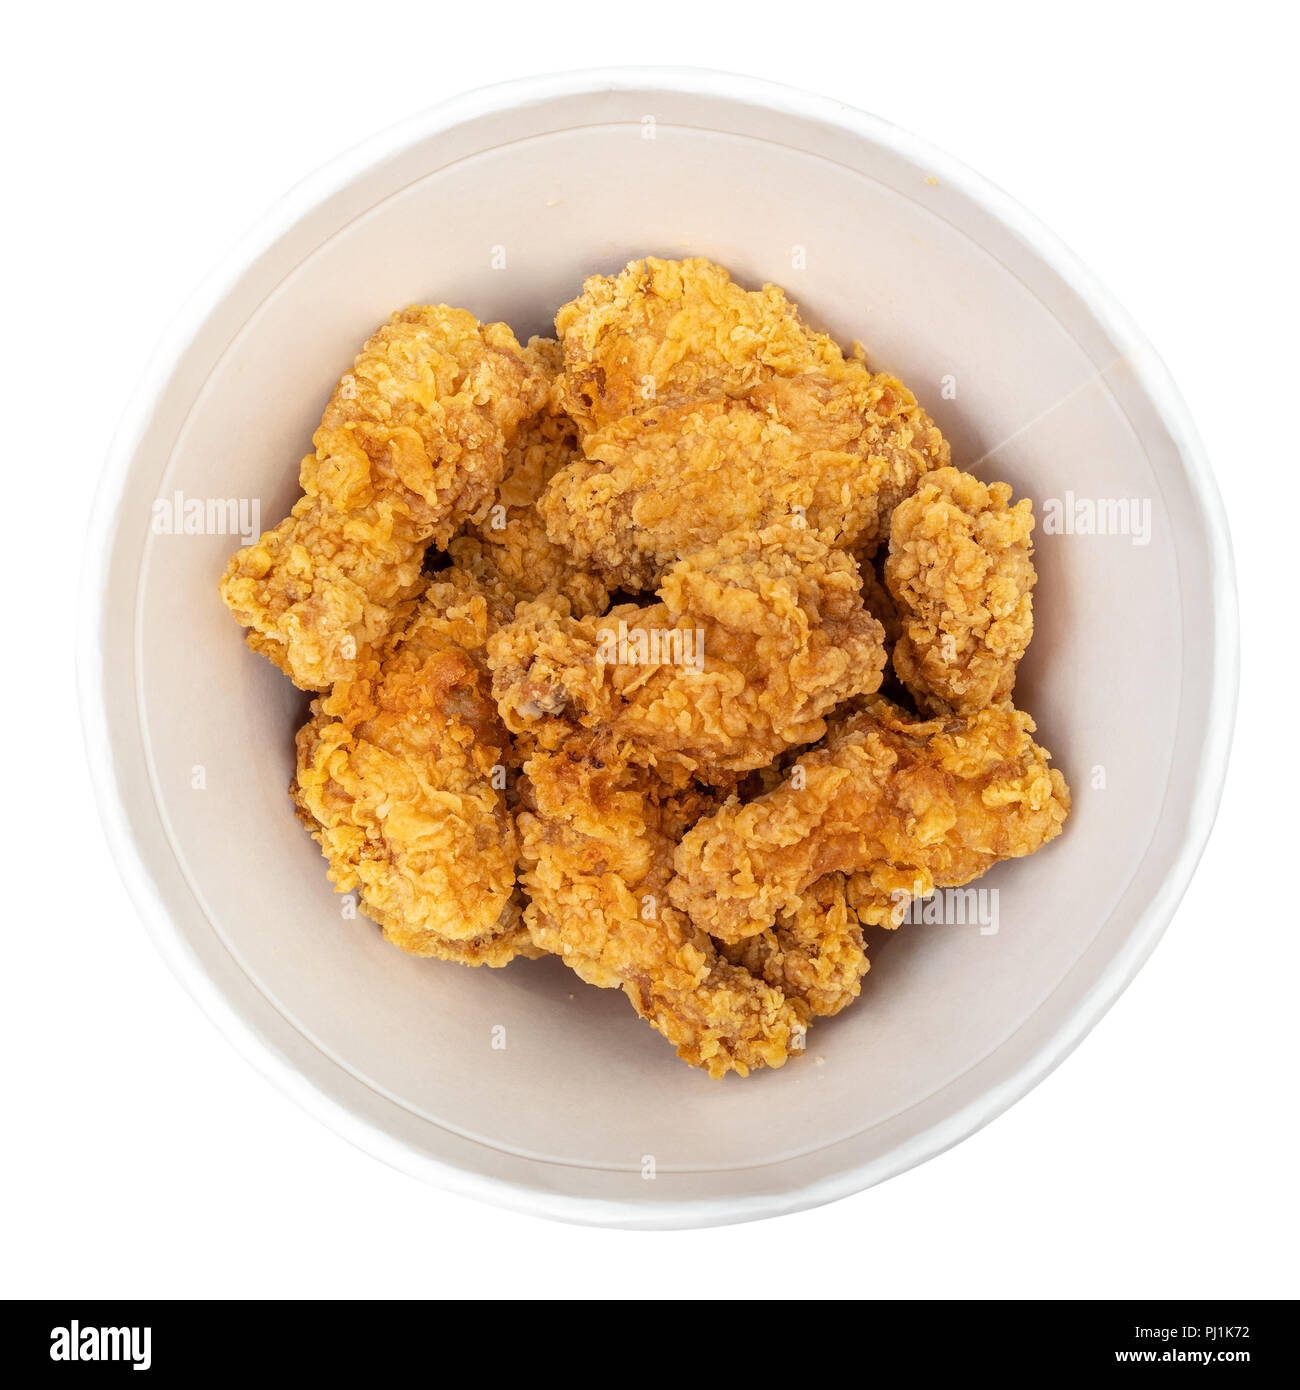 Download Bucket Of Fried Chicken High Resolution Stock Photography And Images Alamy